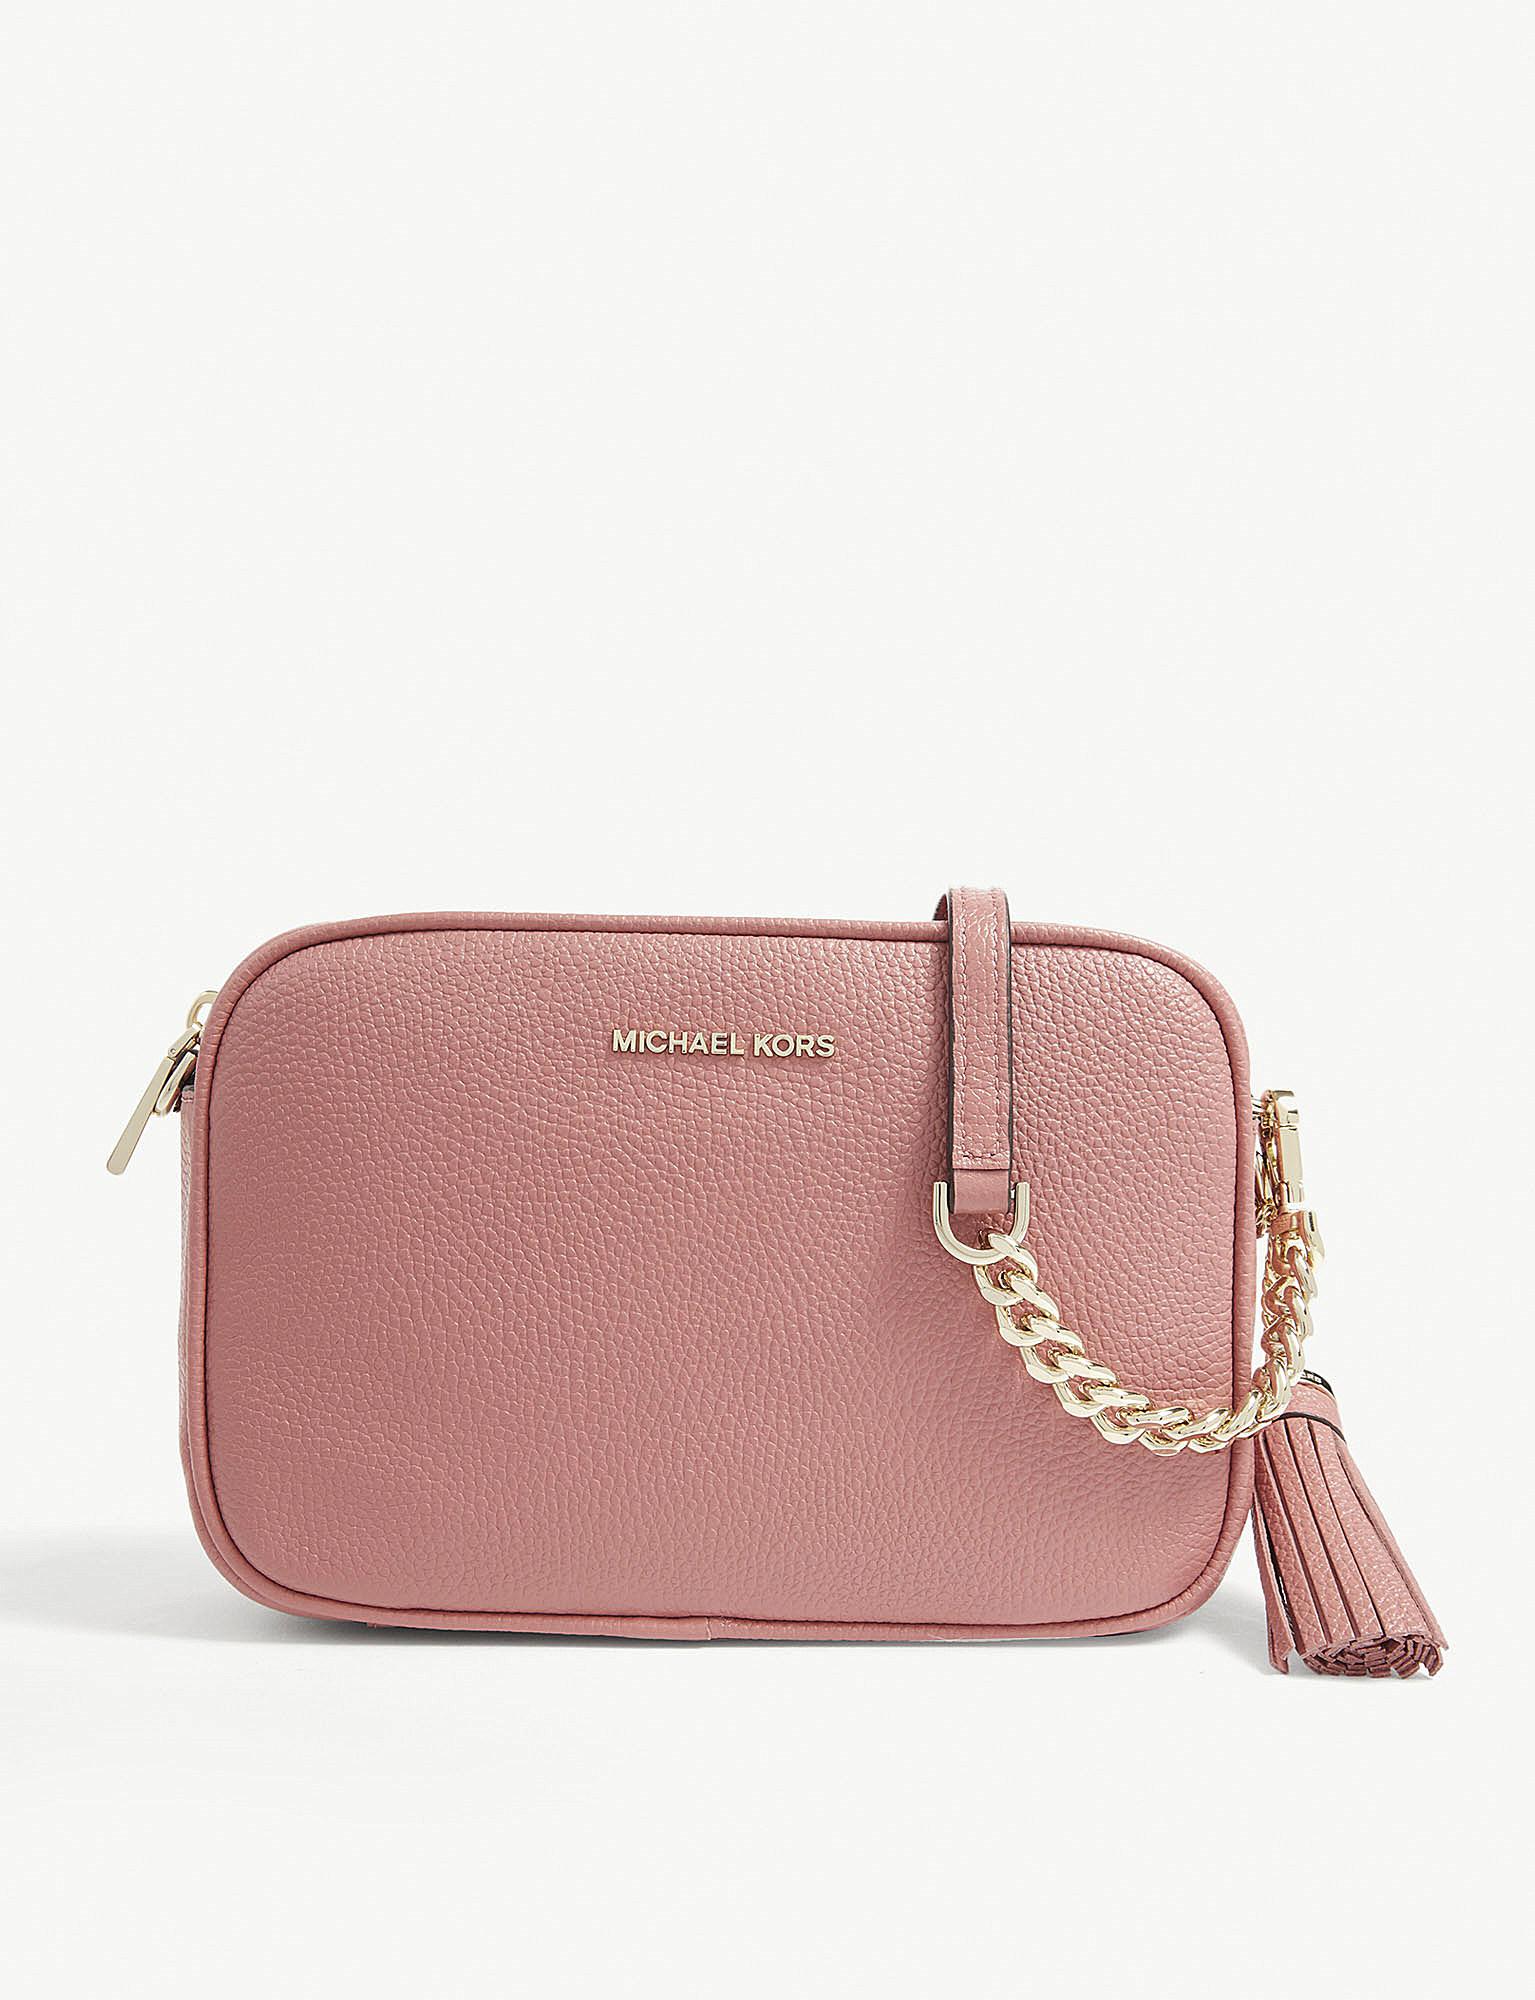 MICHAEL Michael Kors Ginny Leather Cross-body Bag in Rose (Pink) - Lyst